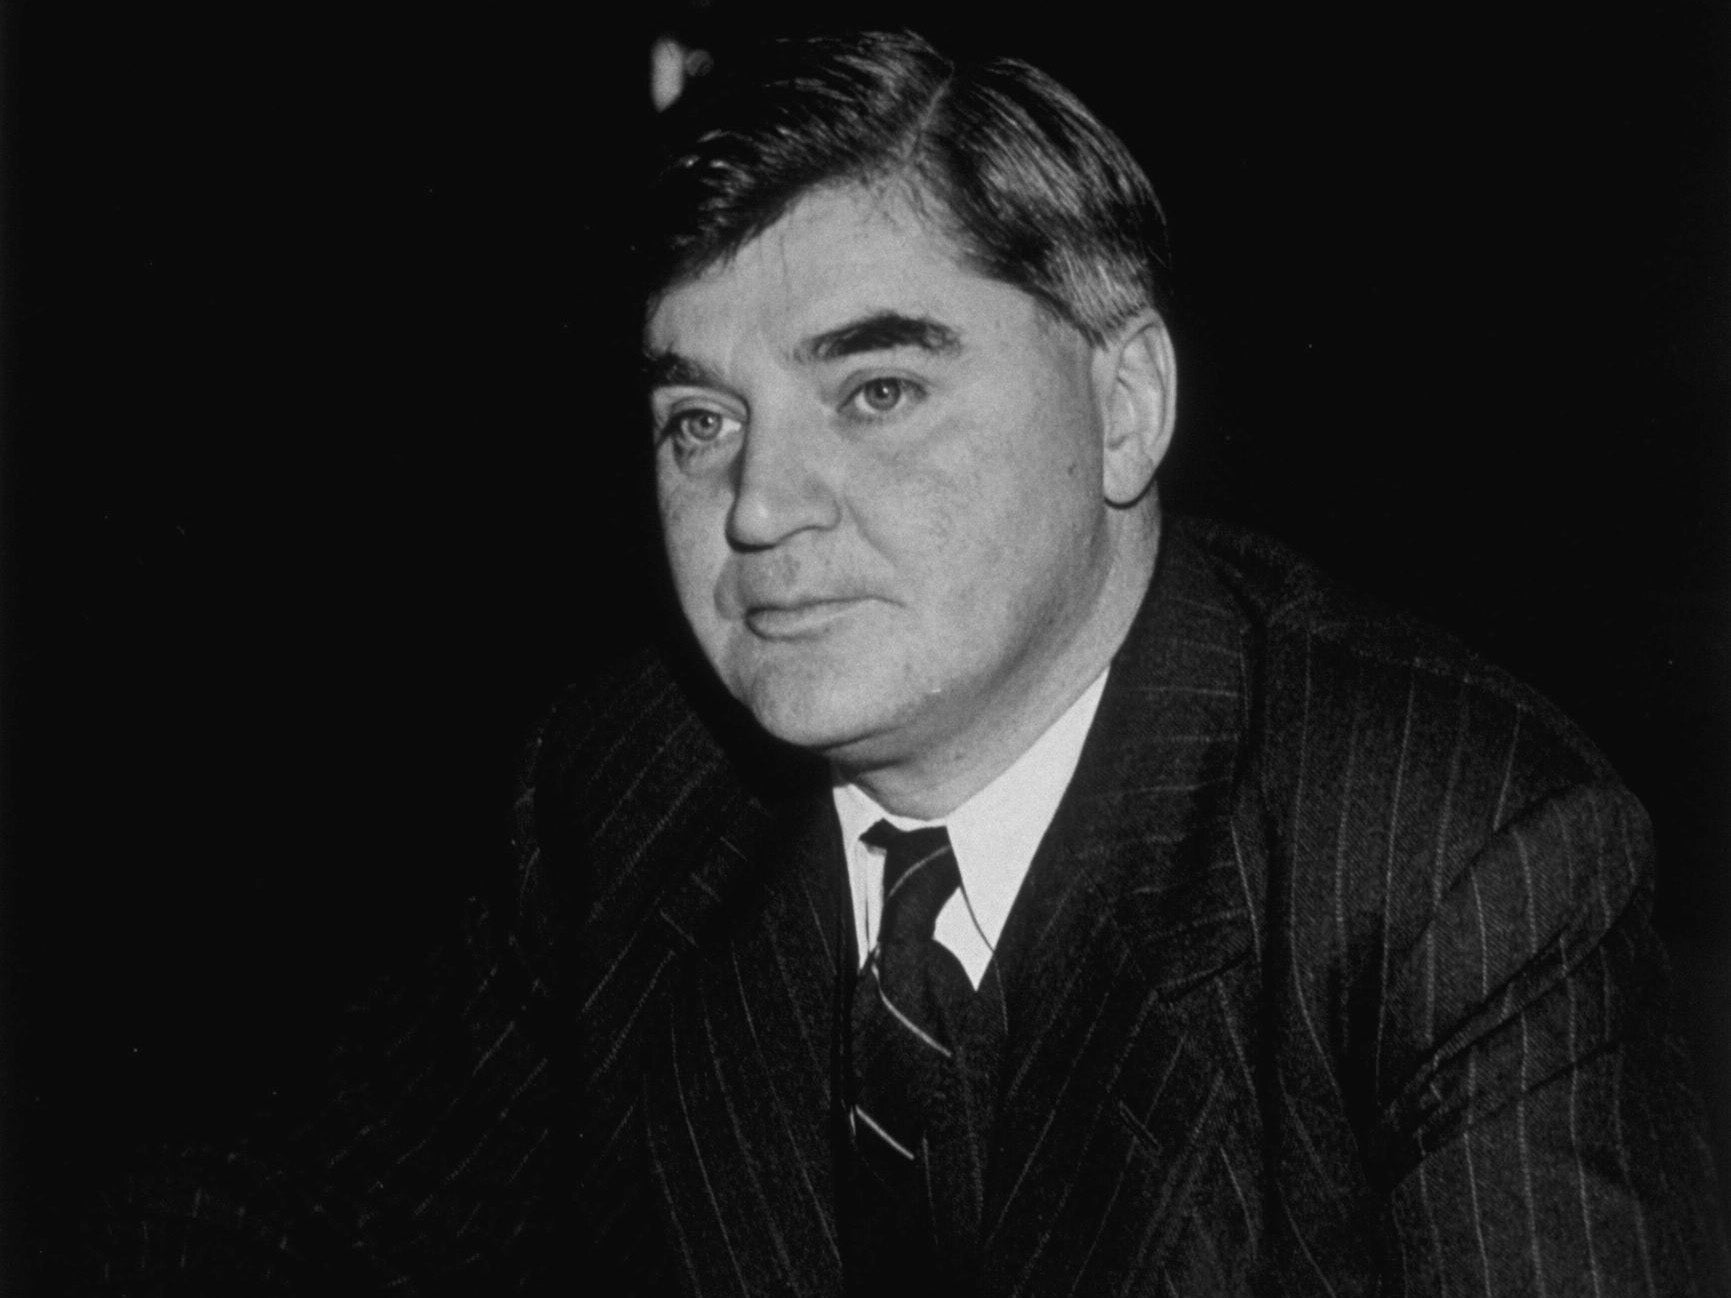 Bevan fought for the principle of free healthcare at the point of delivery based on need, not wealth